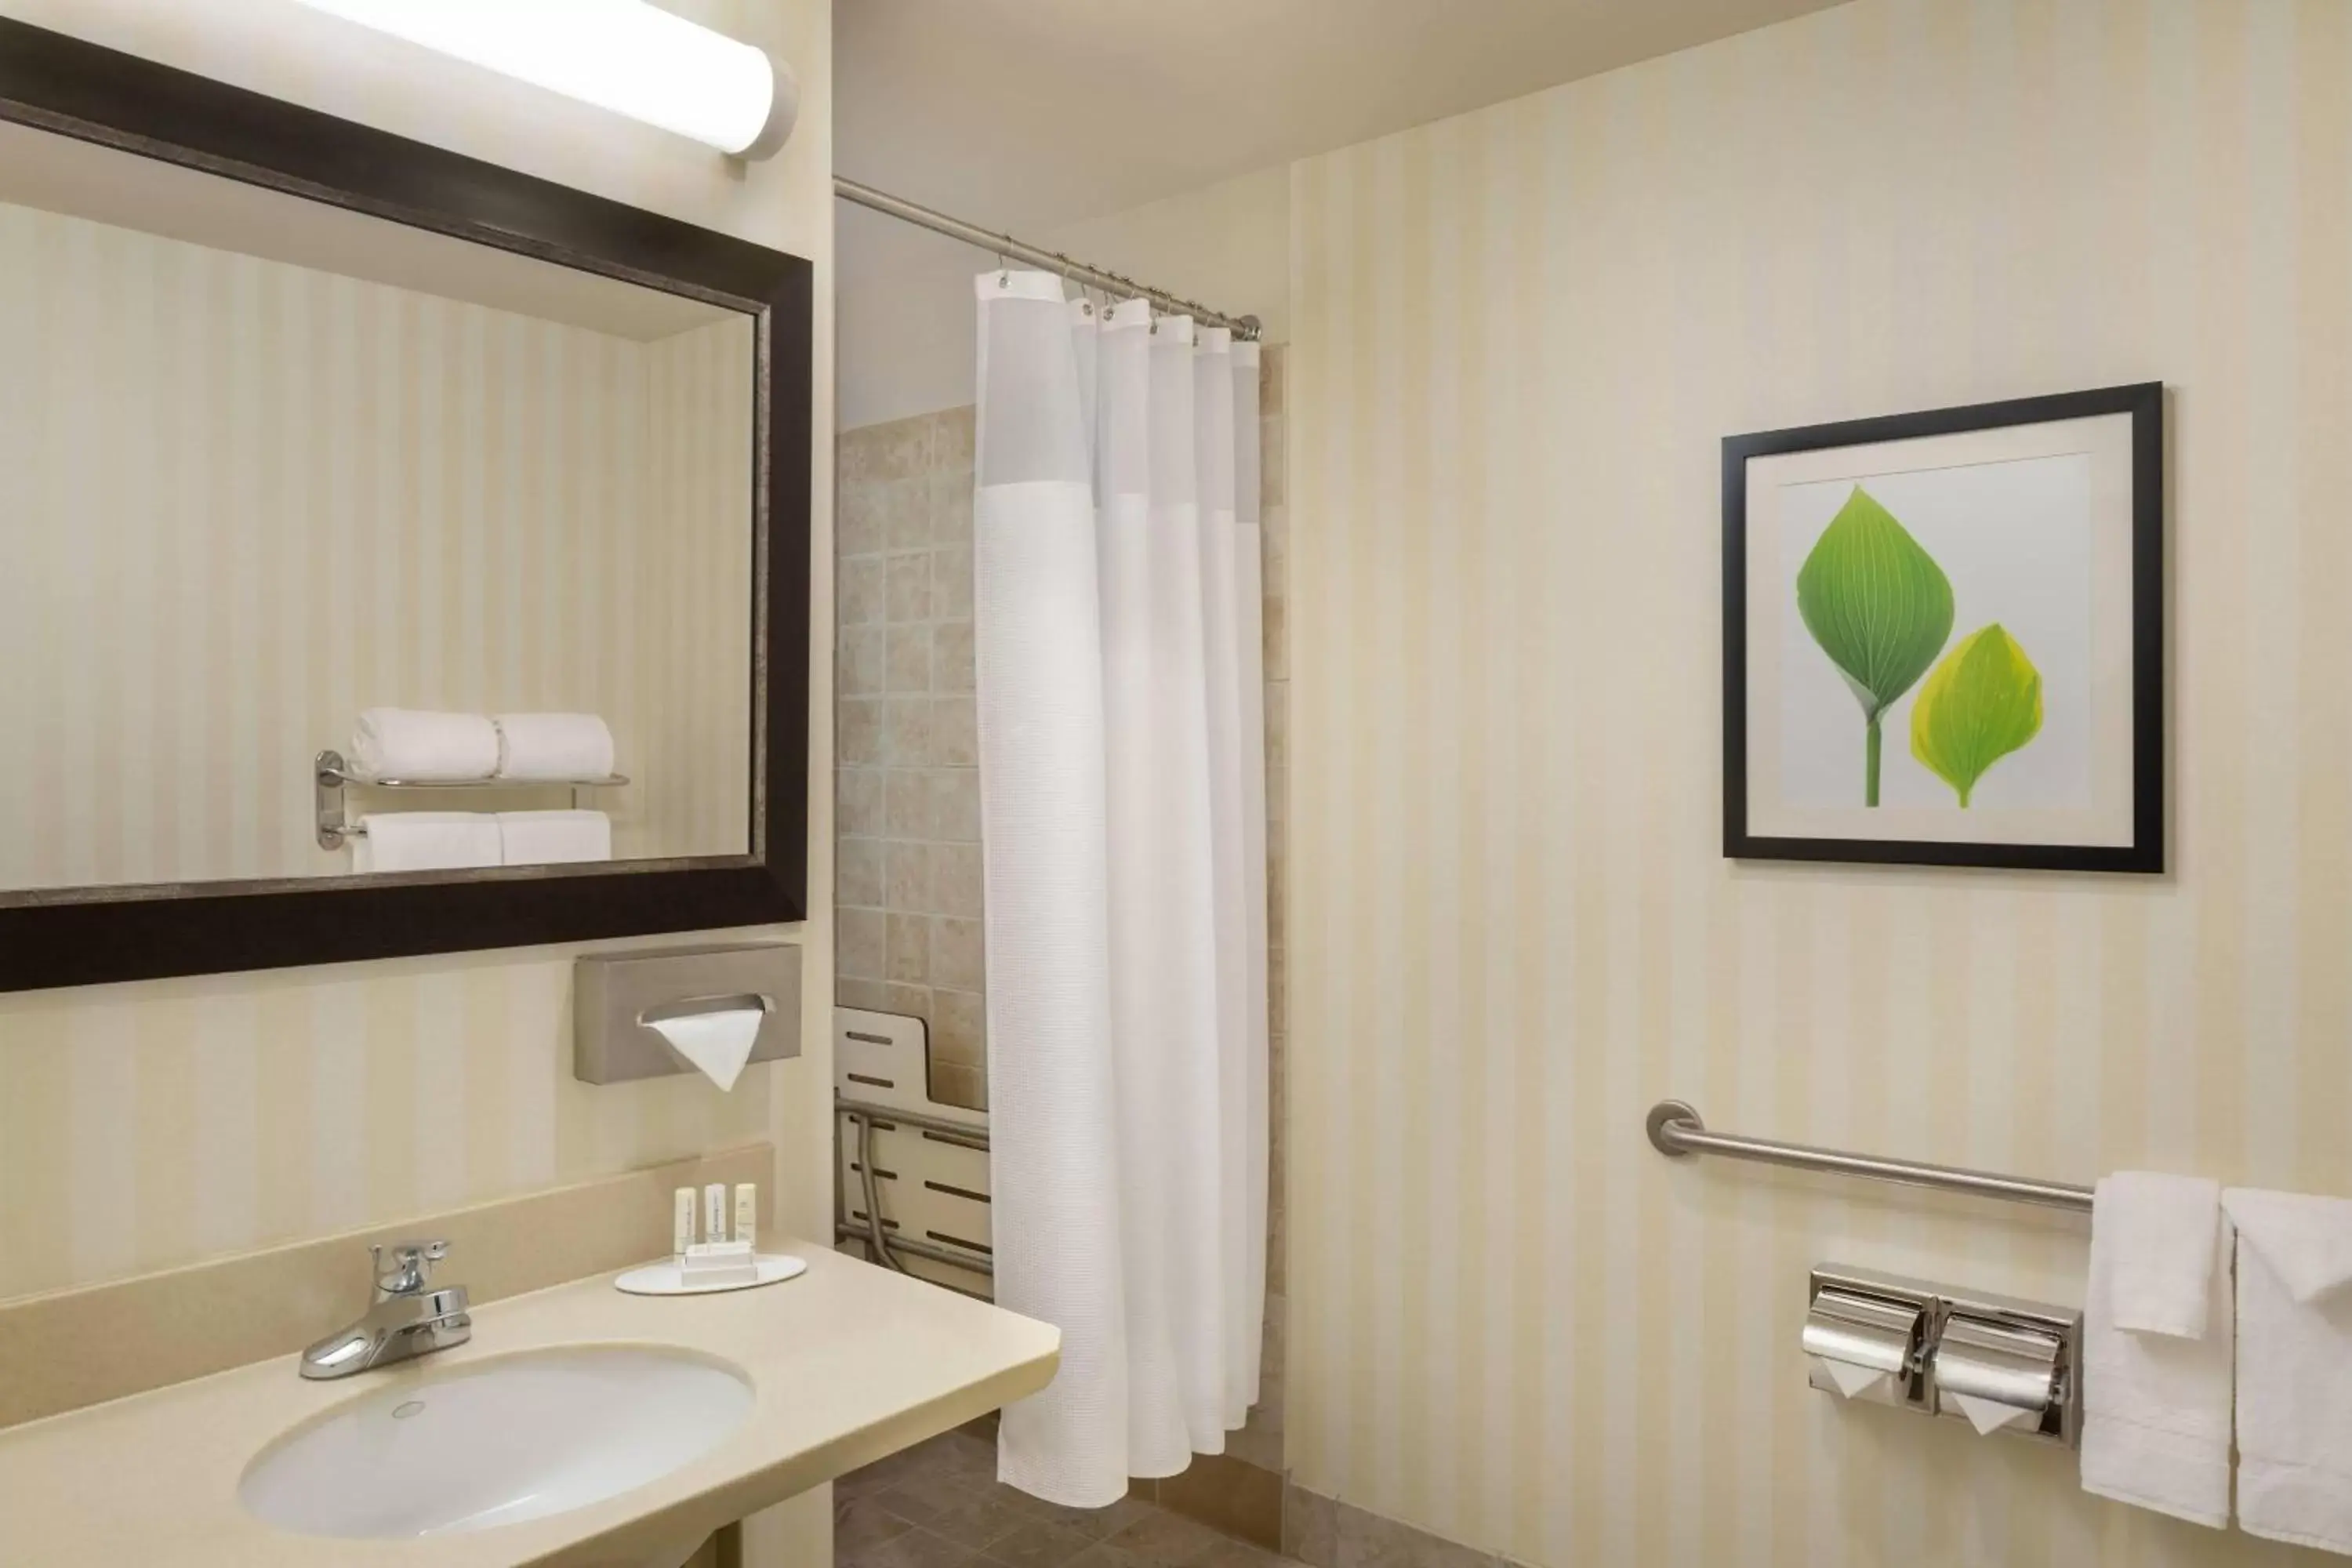 Bathroom in Fairfield Inn and Suites by Marriott Napa American Canyon